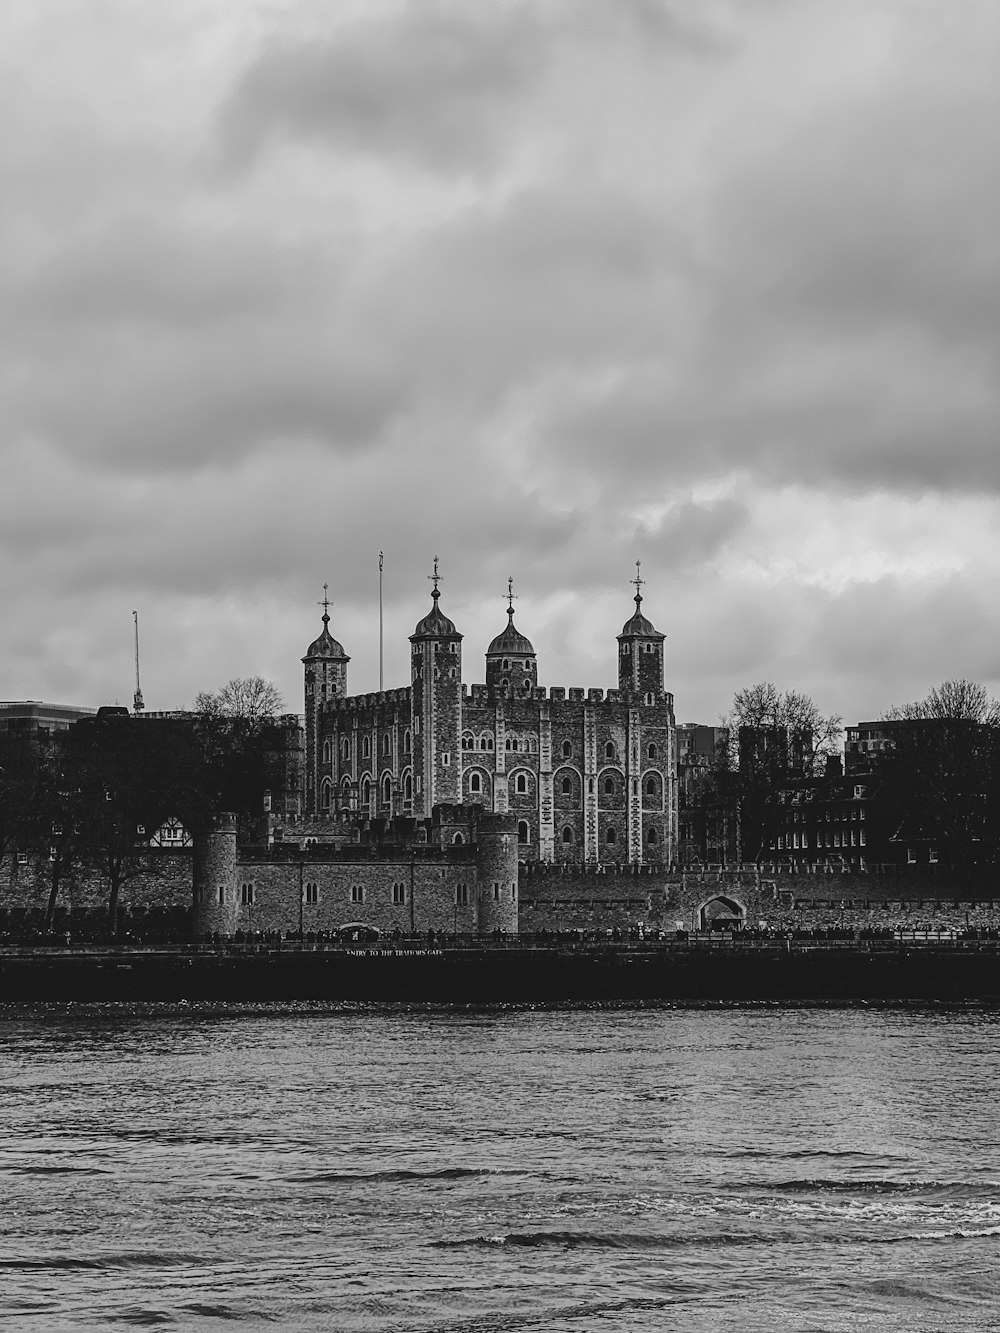 a black and white photo of a castle next to a body of water